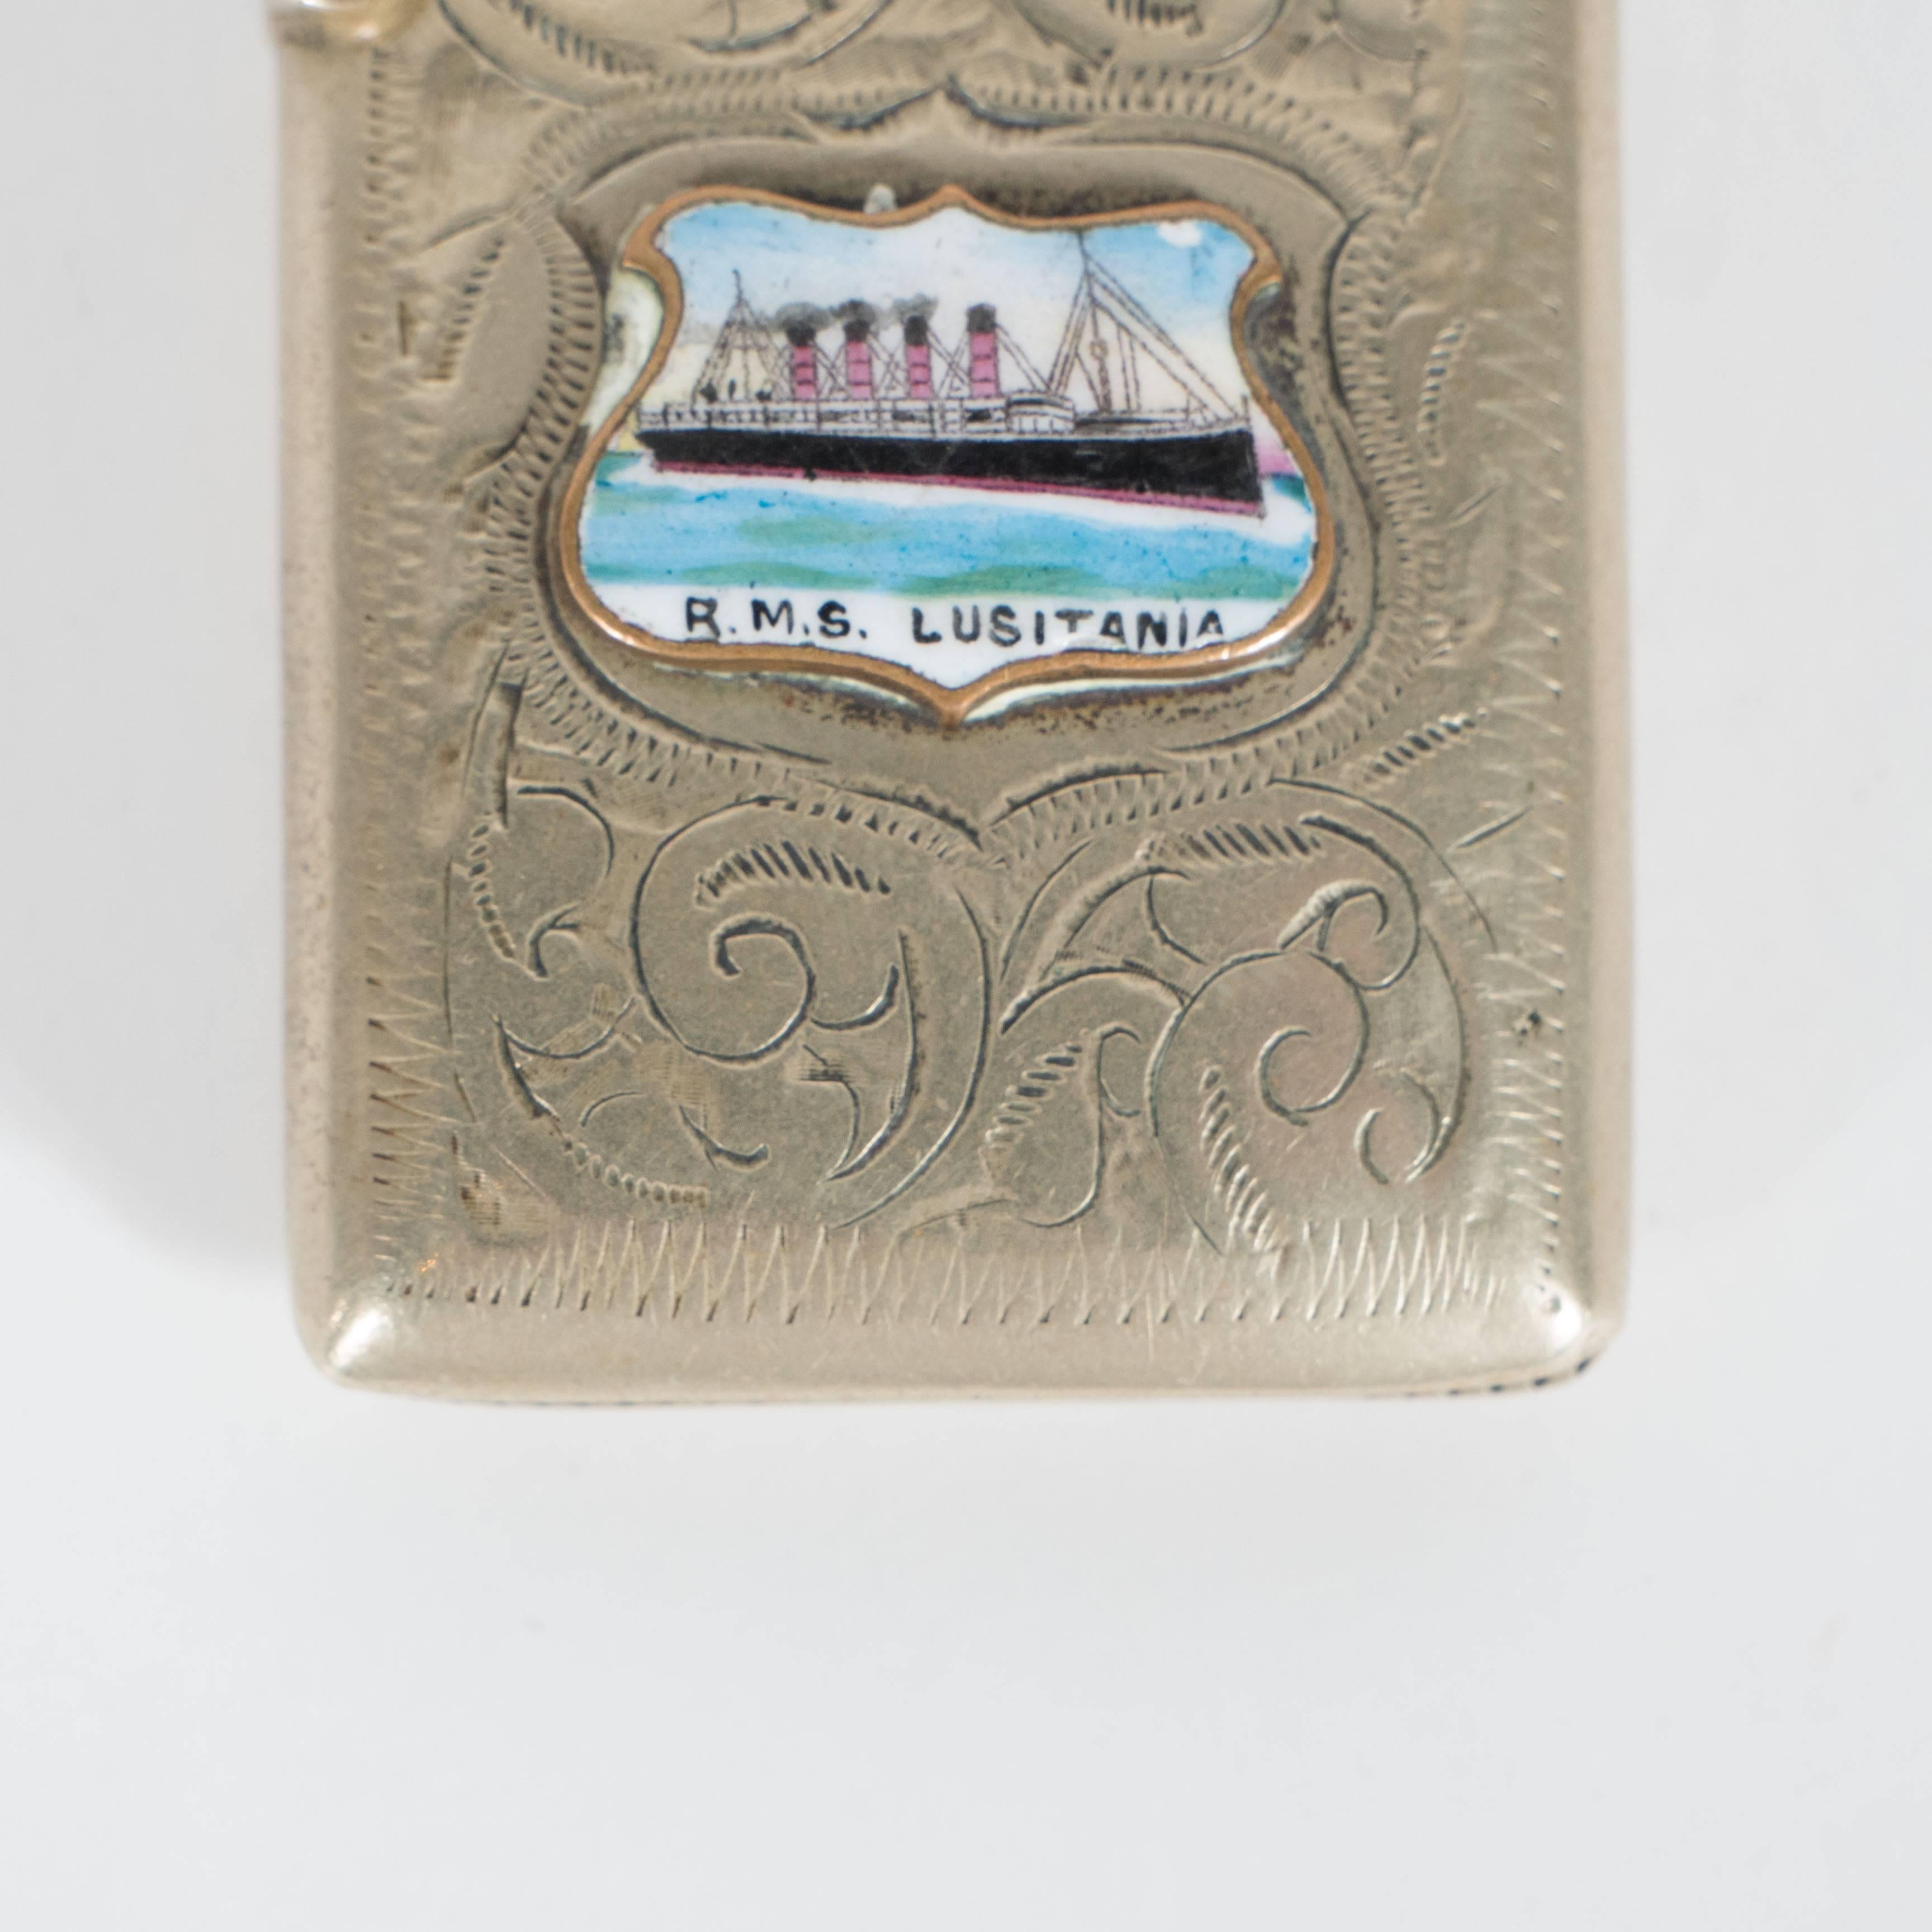 English Antique Silver Plate and Enamel Lusitania Match Case Holder